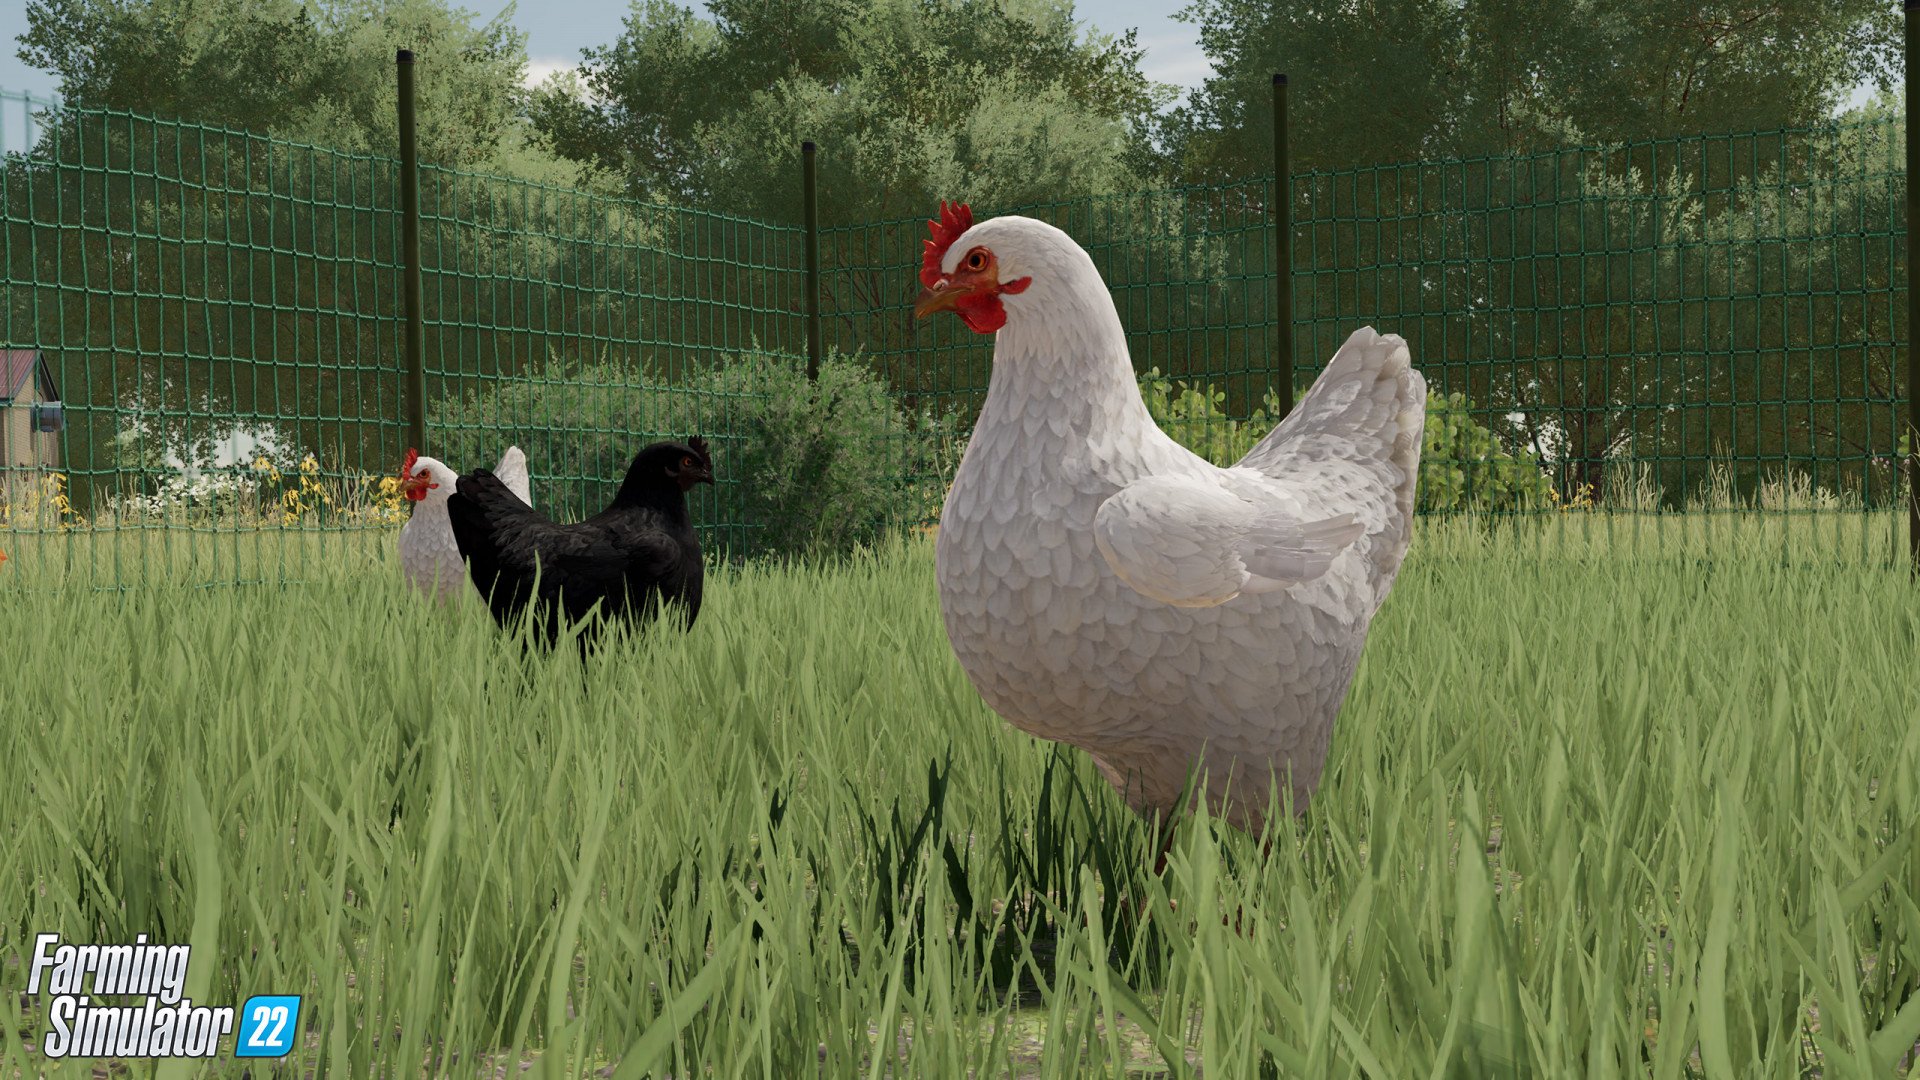 New Farmlife Trailer Released, Featuring Beekeeping & Animals